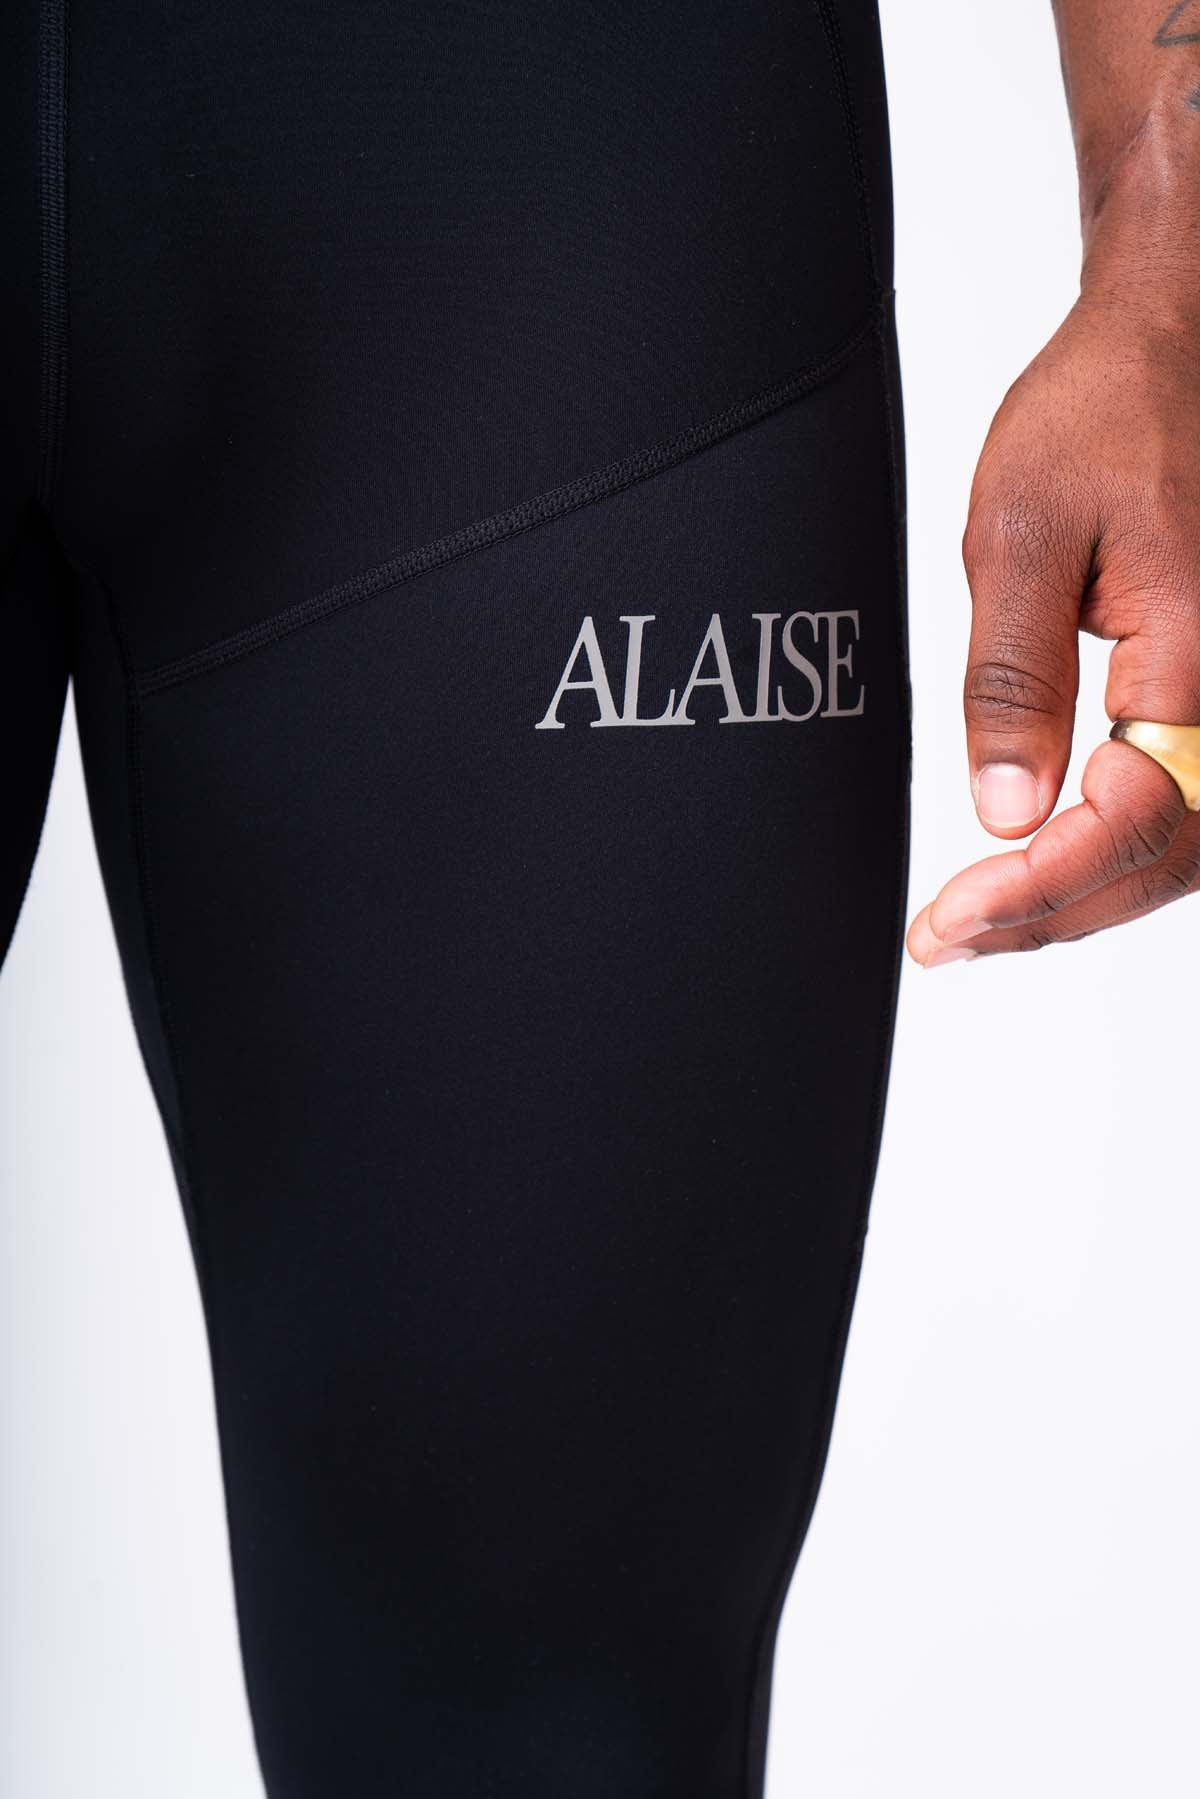 Alaise Active Tights - Black